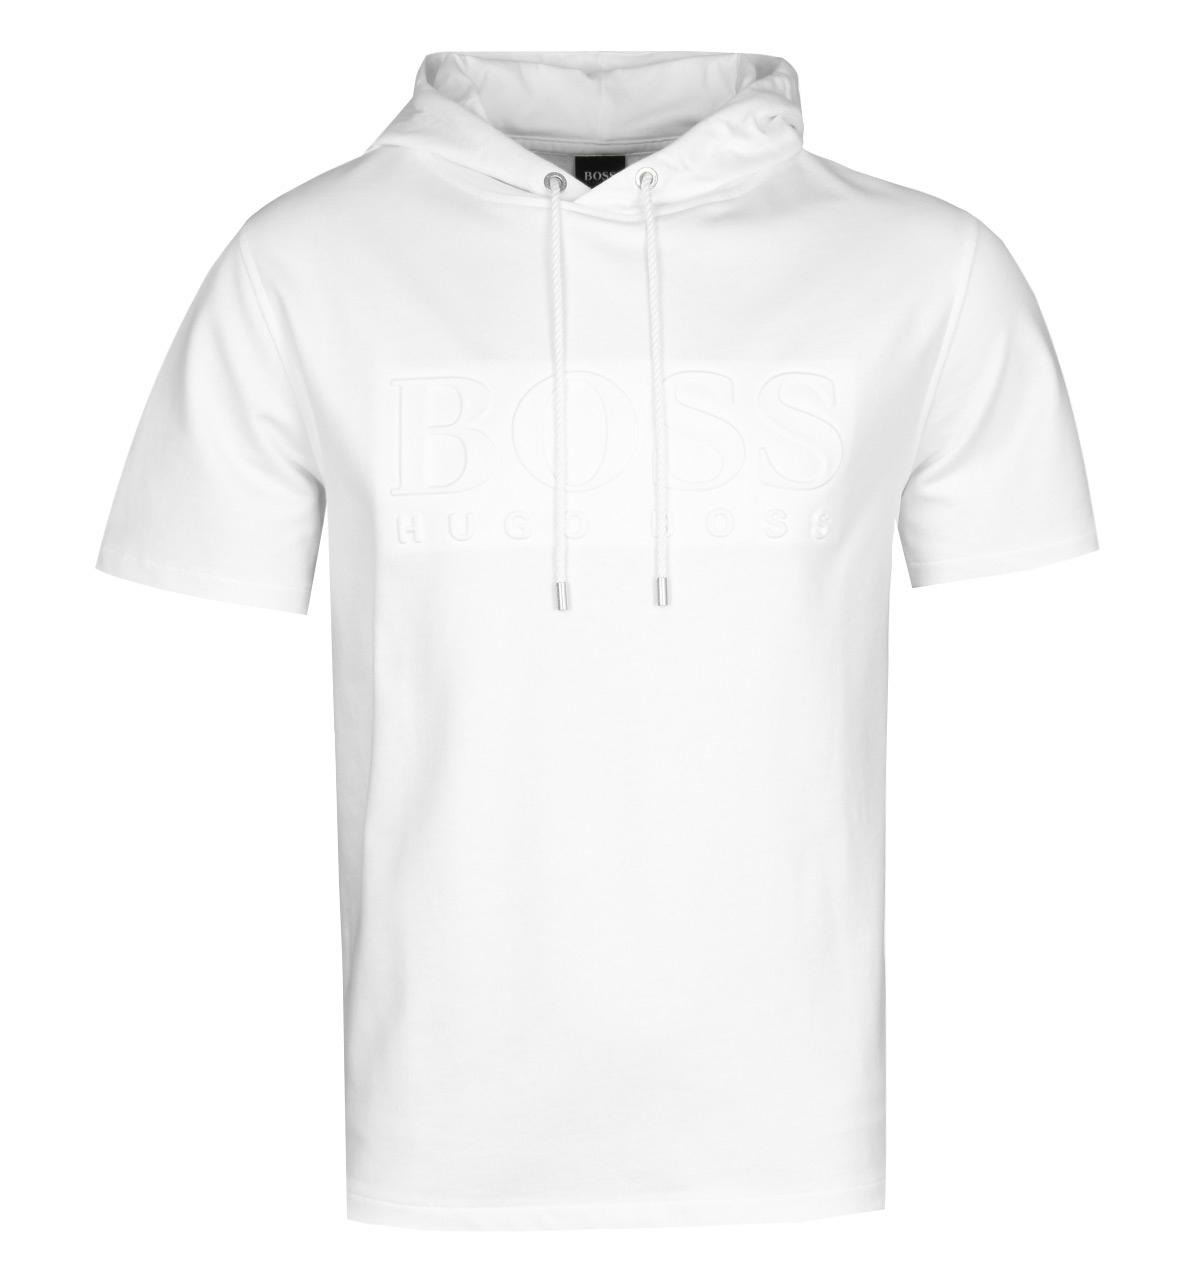 Hugo Boss Heritage Hoodie Top Sellers, SAVE 42% - aveclumiere.com